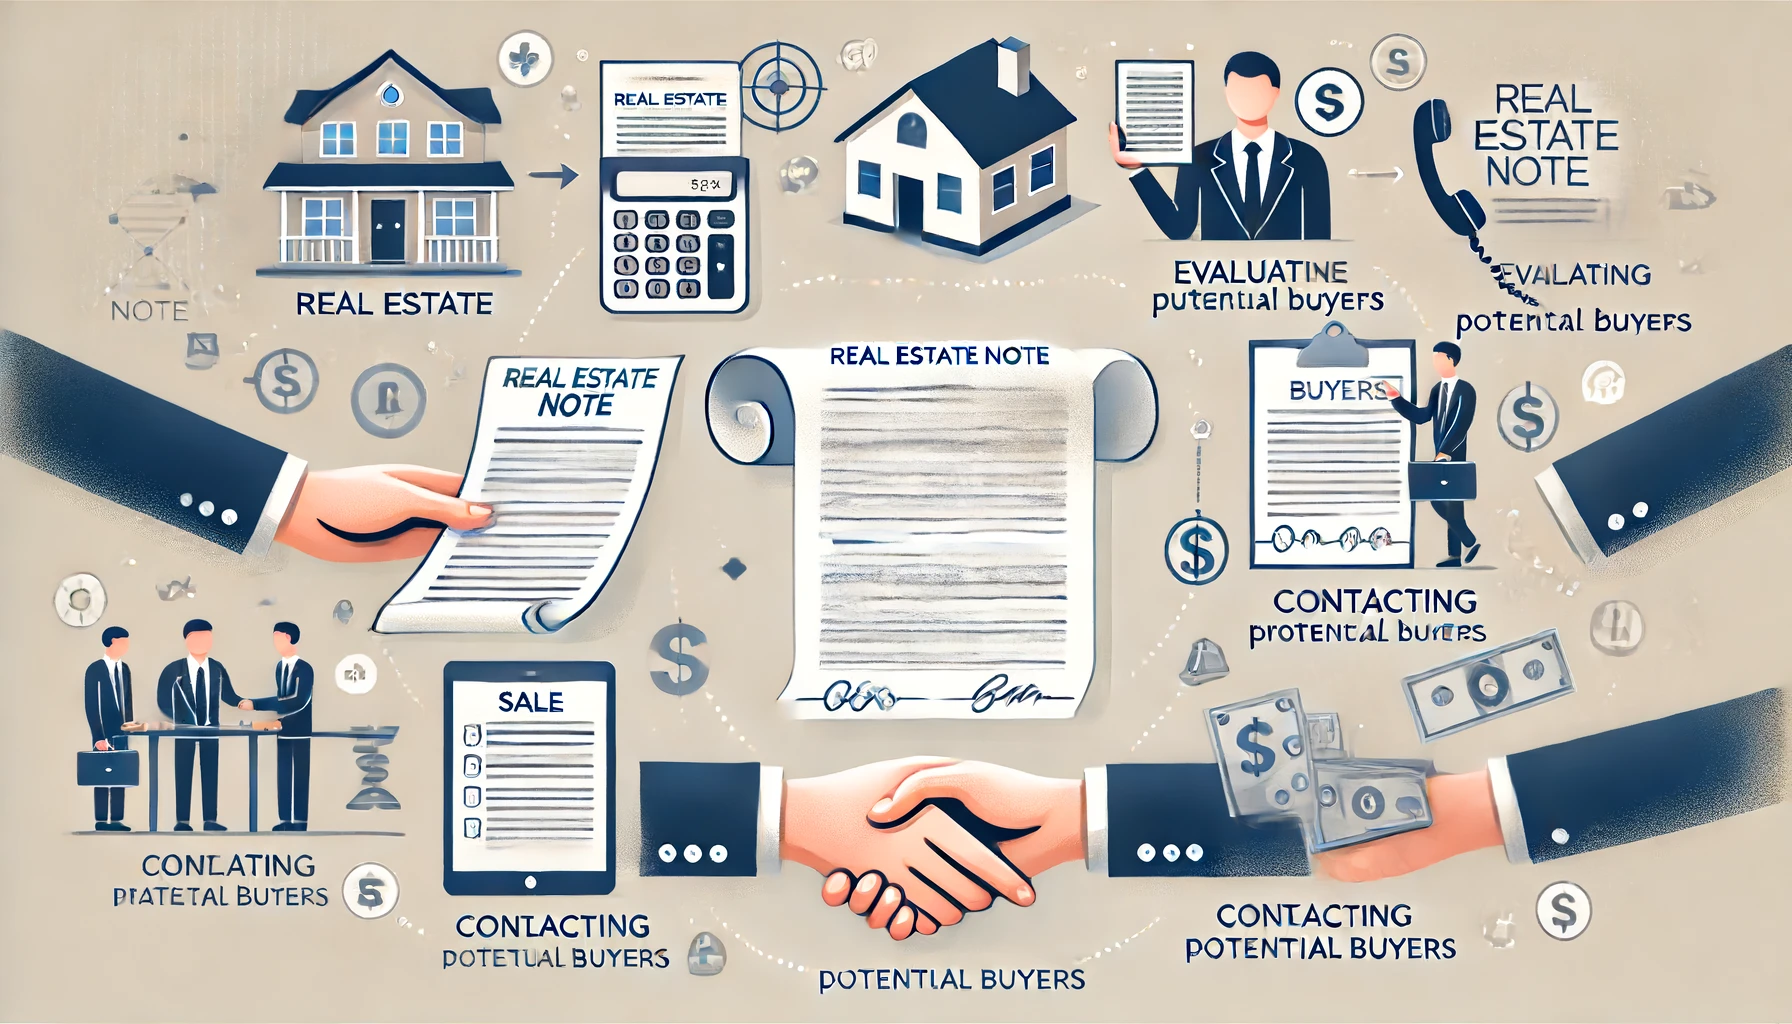 How to Sell Real Estate Notes